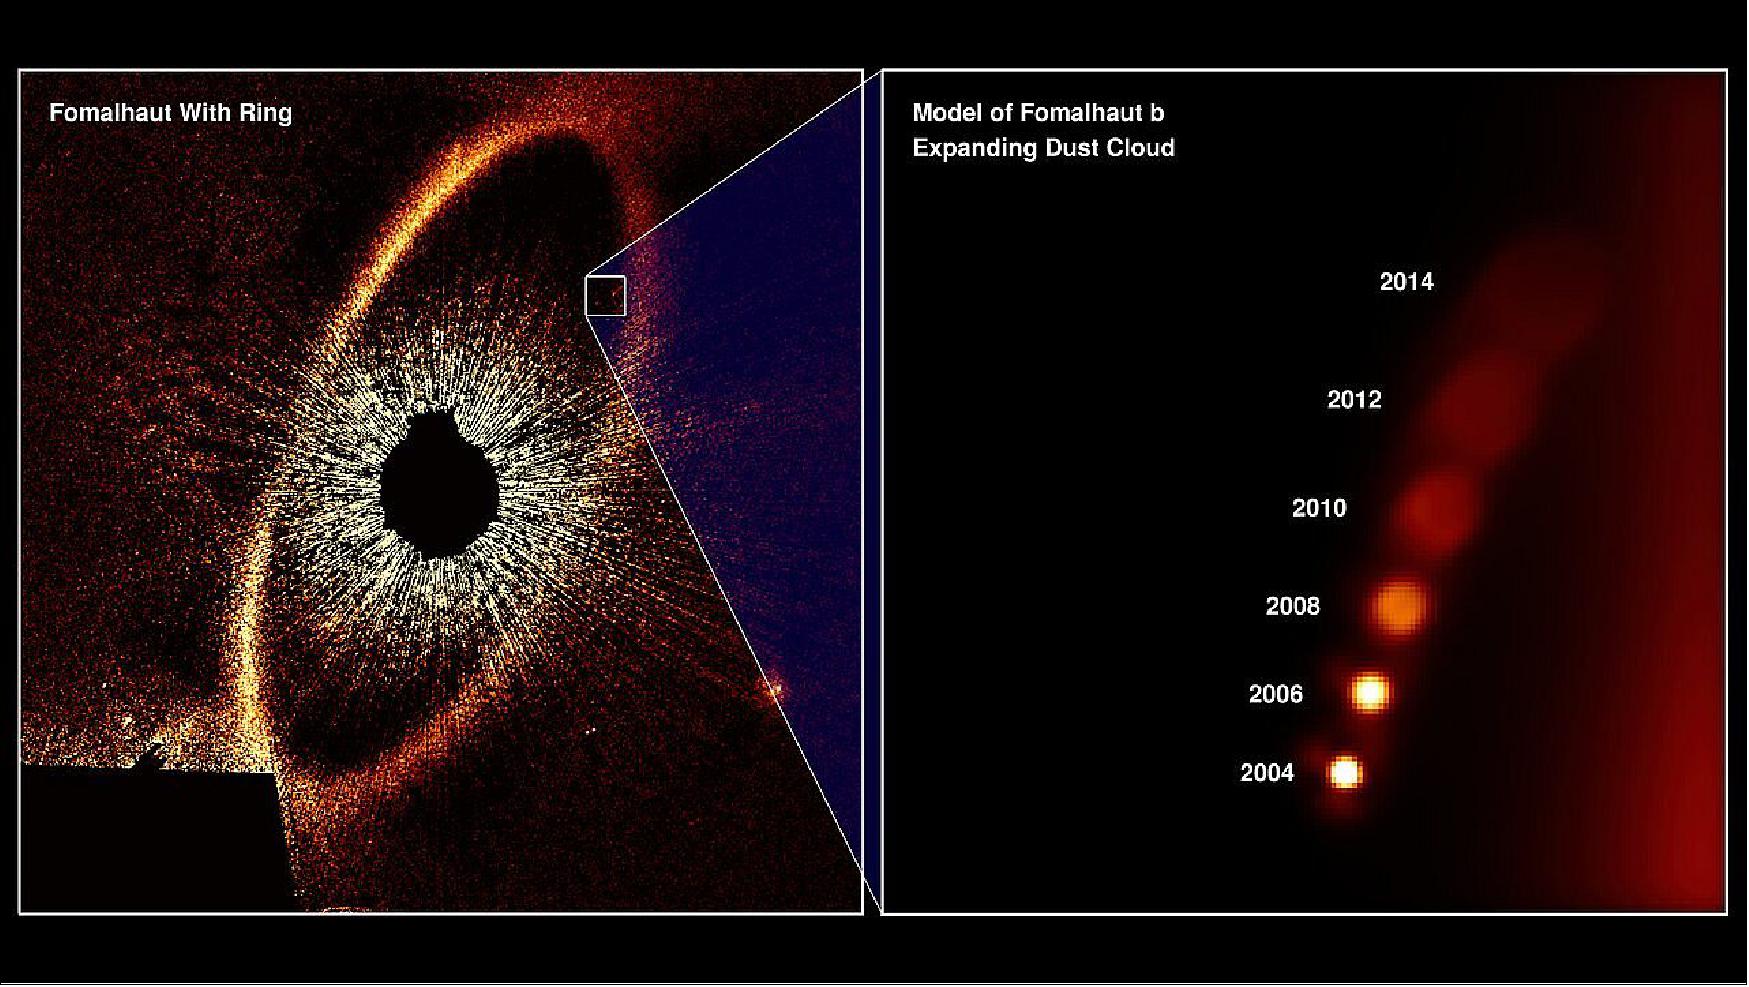 Figure 76: Illustration from the Hubble Space Telescope’s observations of Fomalhaut b’s expanding dust cloud from 2004 to 2013. The cloud was produced in a collision between two large bodies orbiting the bright nearby star Fomalhaut. This is the first time such a catastrophic event around another star has been imaged [image credit: NASA, ESA, and A. Gáspár and G. Rieke (University of Arizona)]